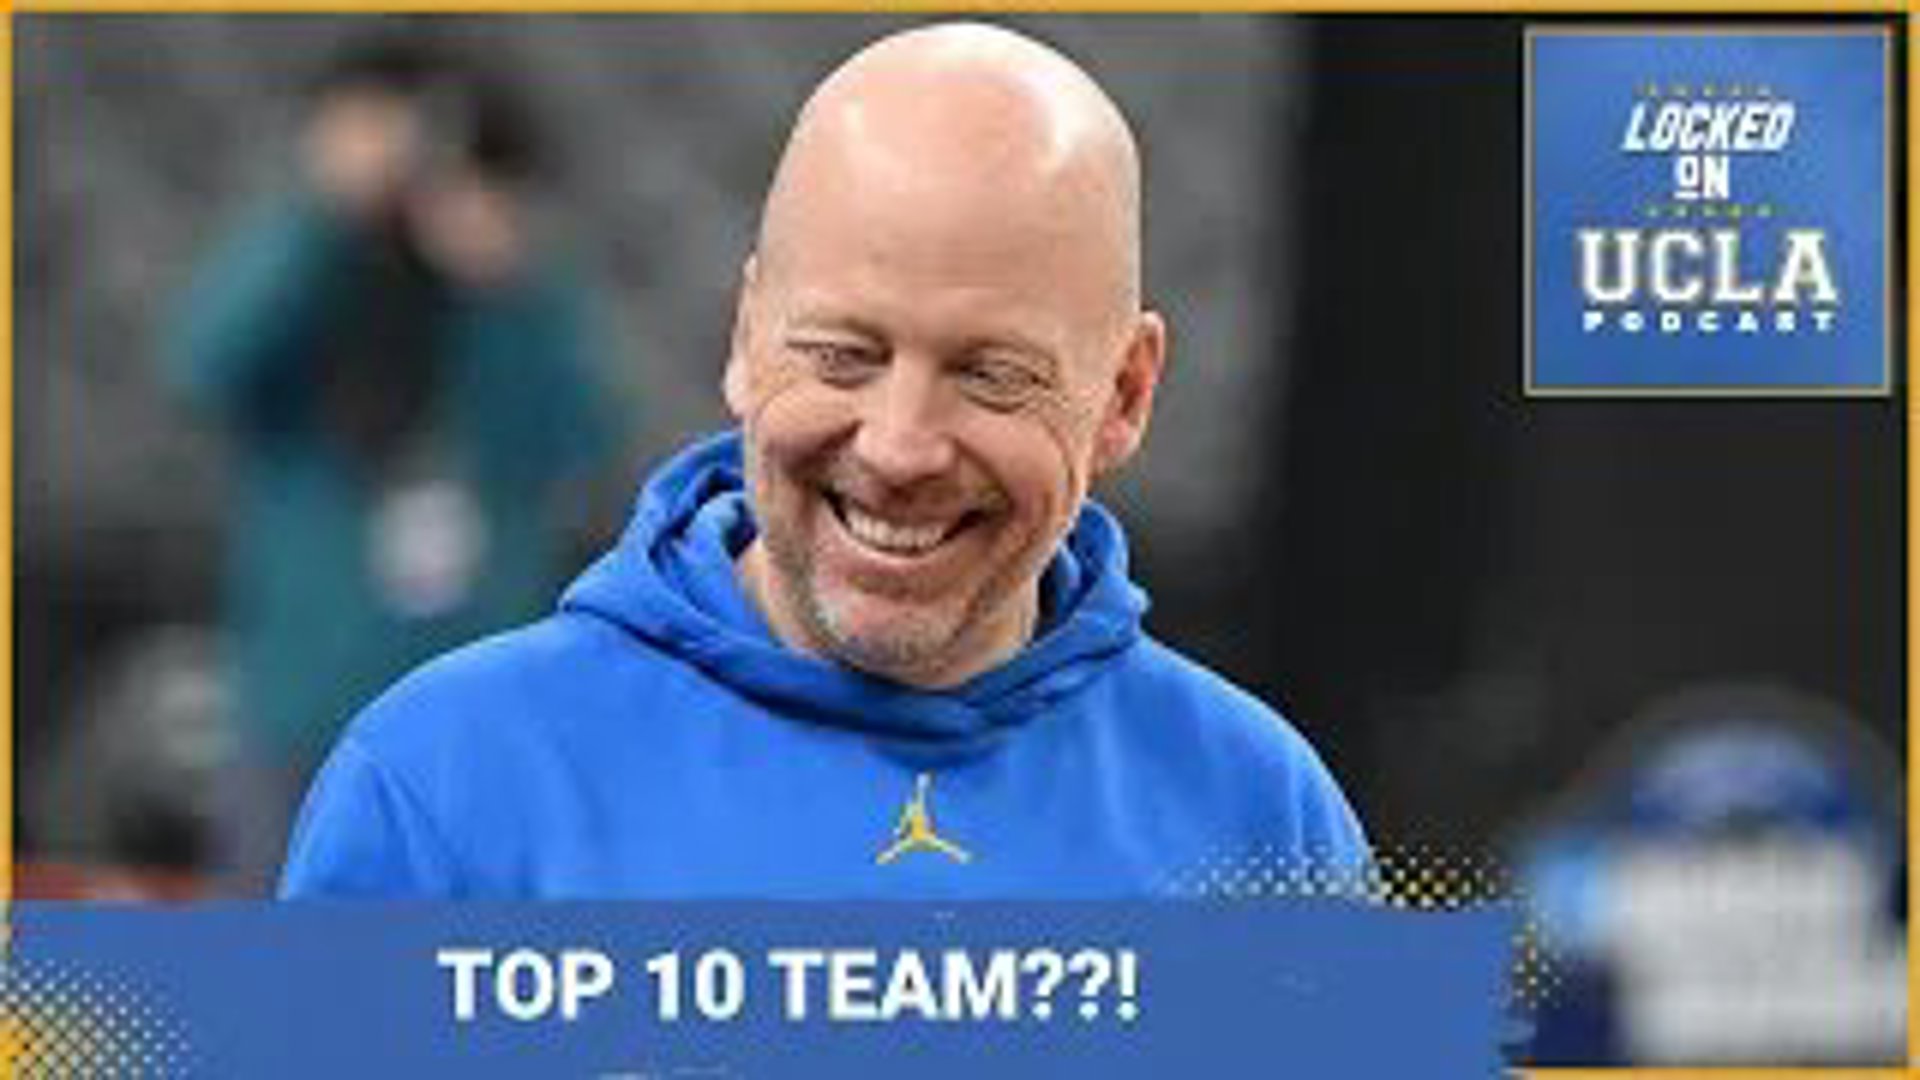 UCLA Basketball is getting love in the Way TOO EARLY Top 25 Rankings after Mick Cronin recruited 6 newcomers in the transfer portal to replace Adem Bona.